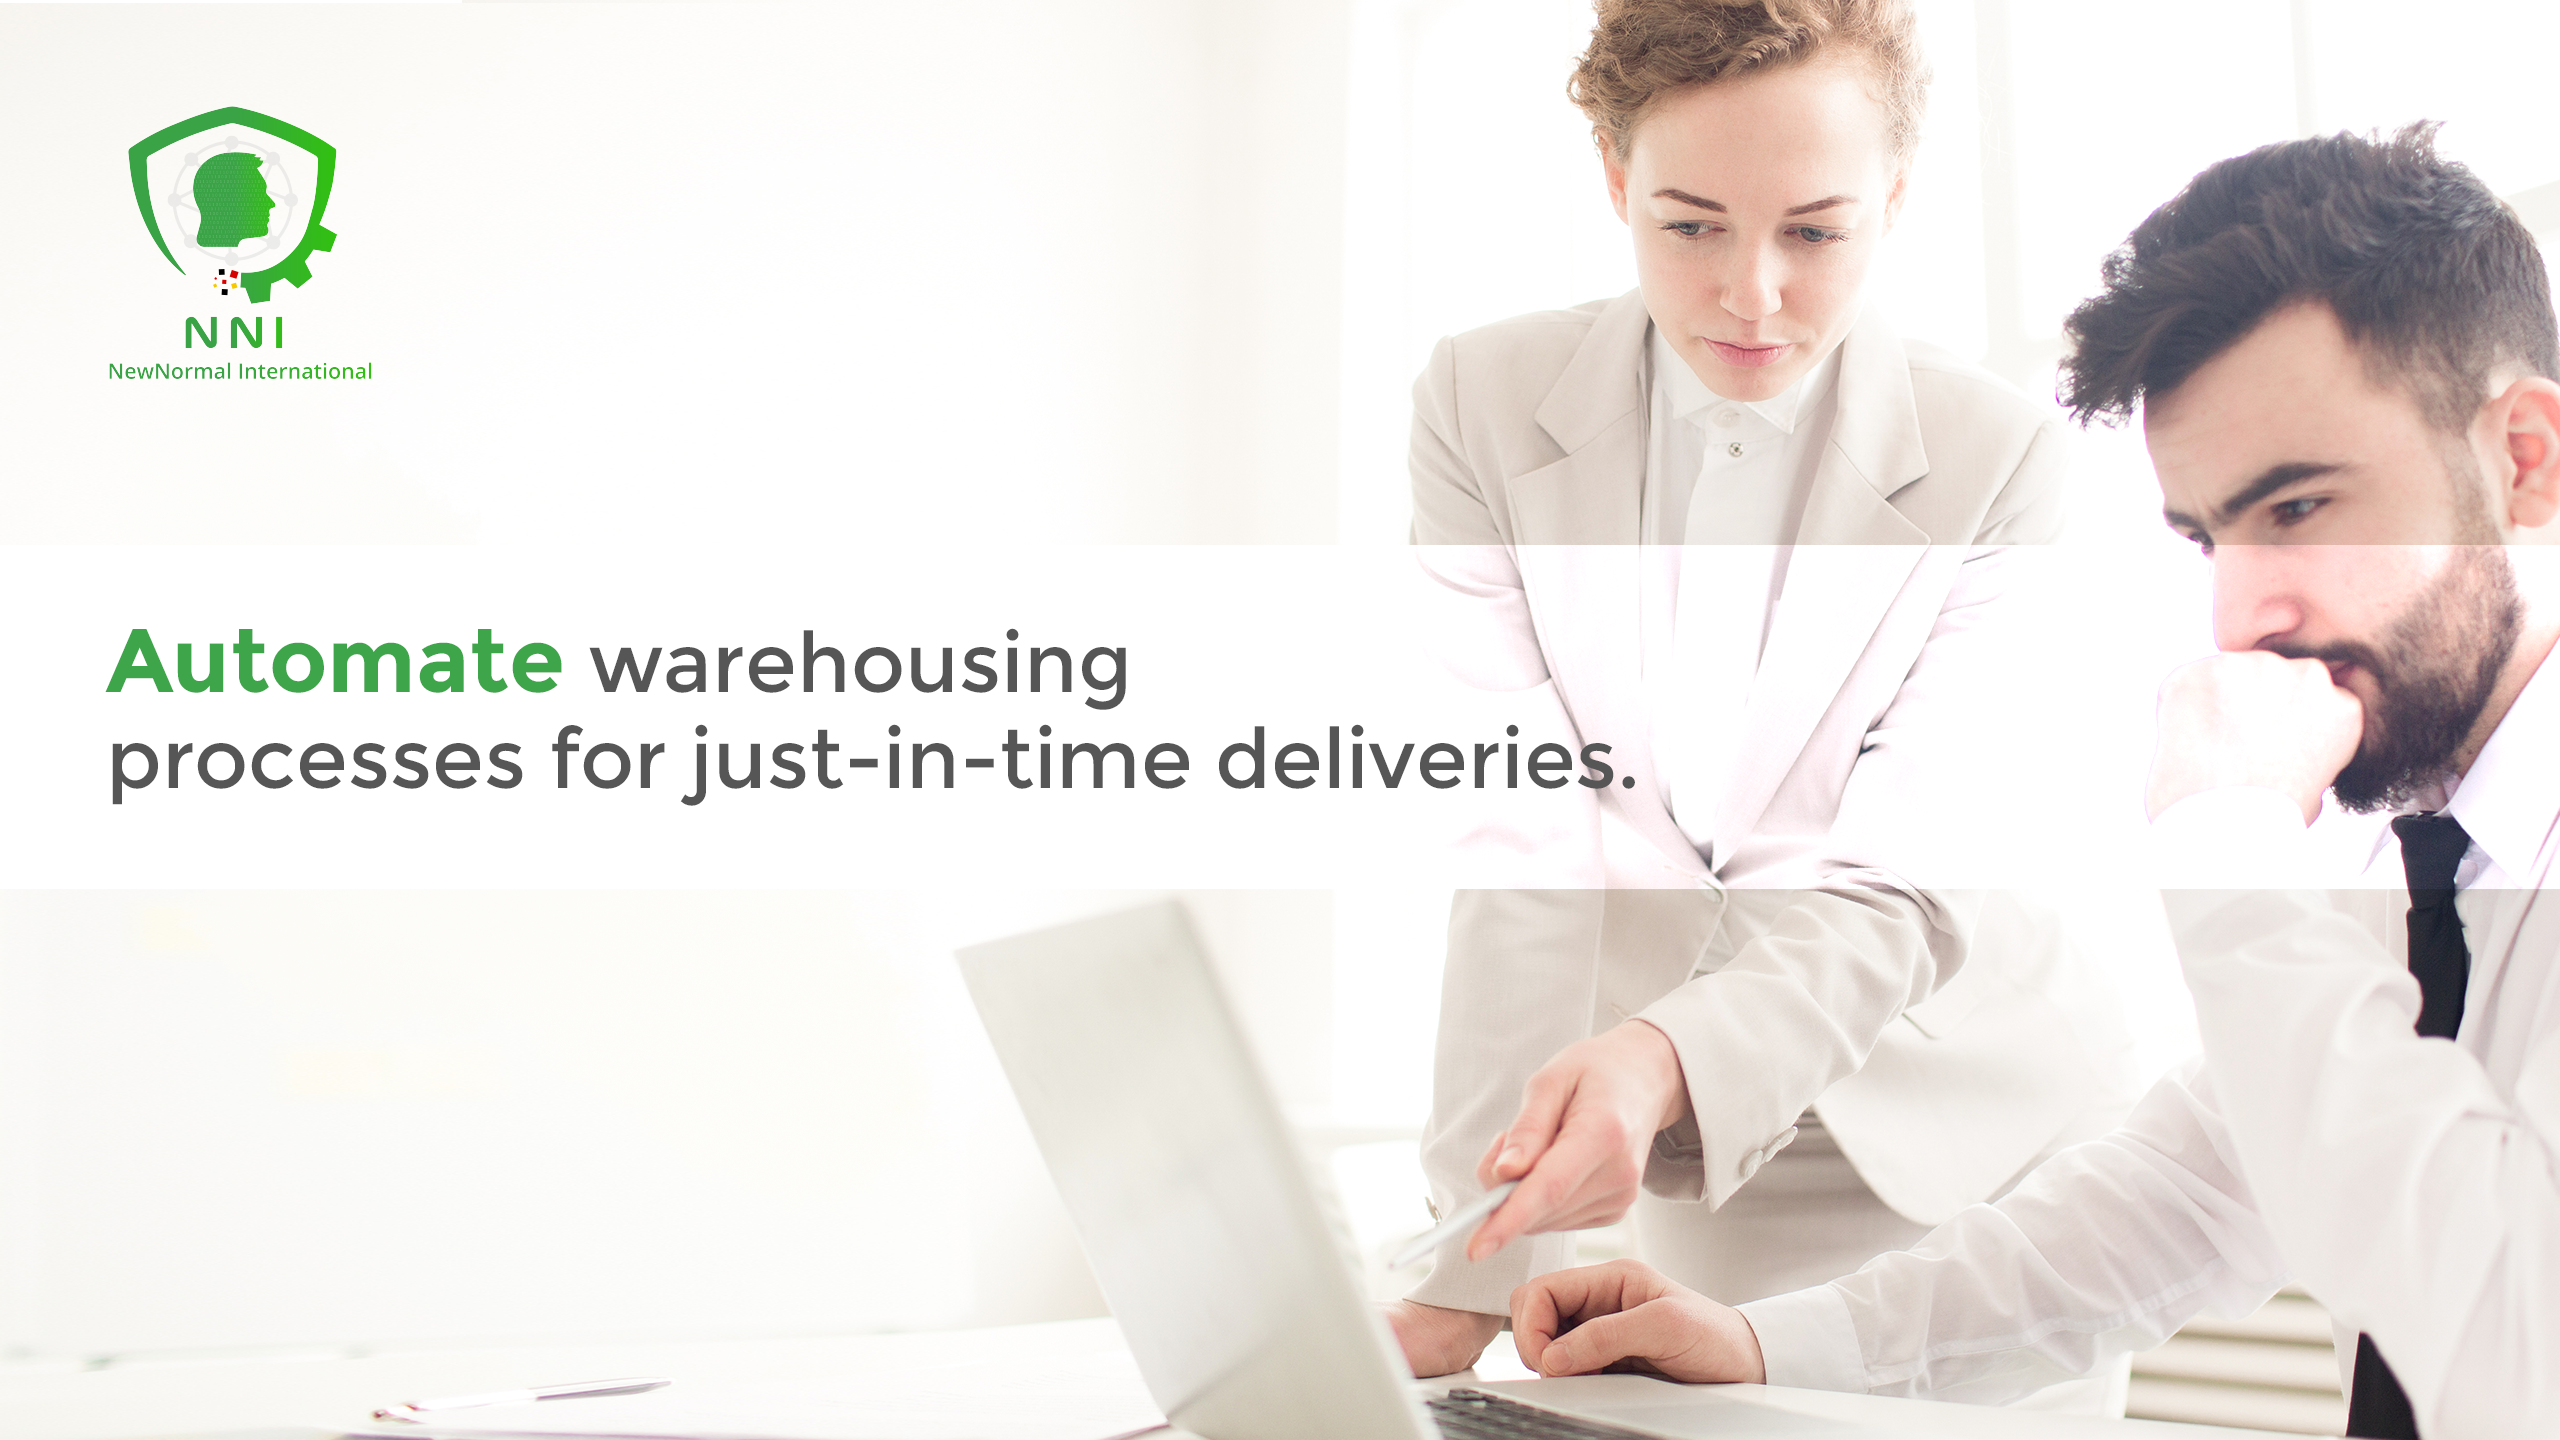 Automate warehousing processes for just-in-time deliveries